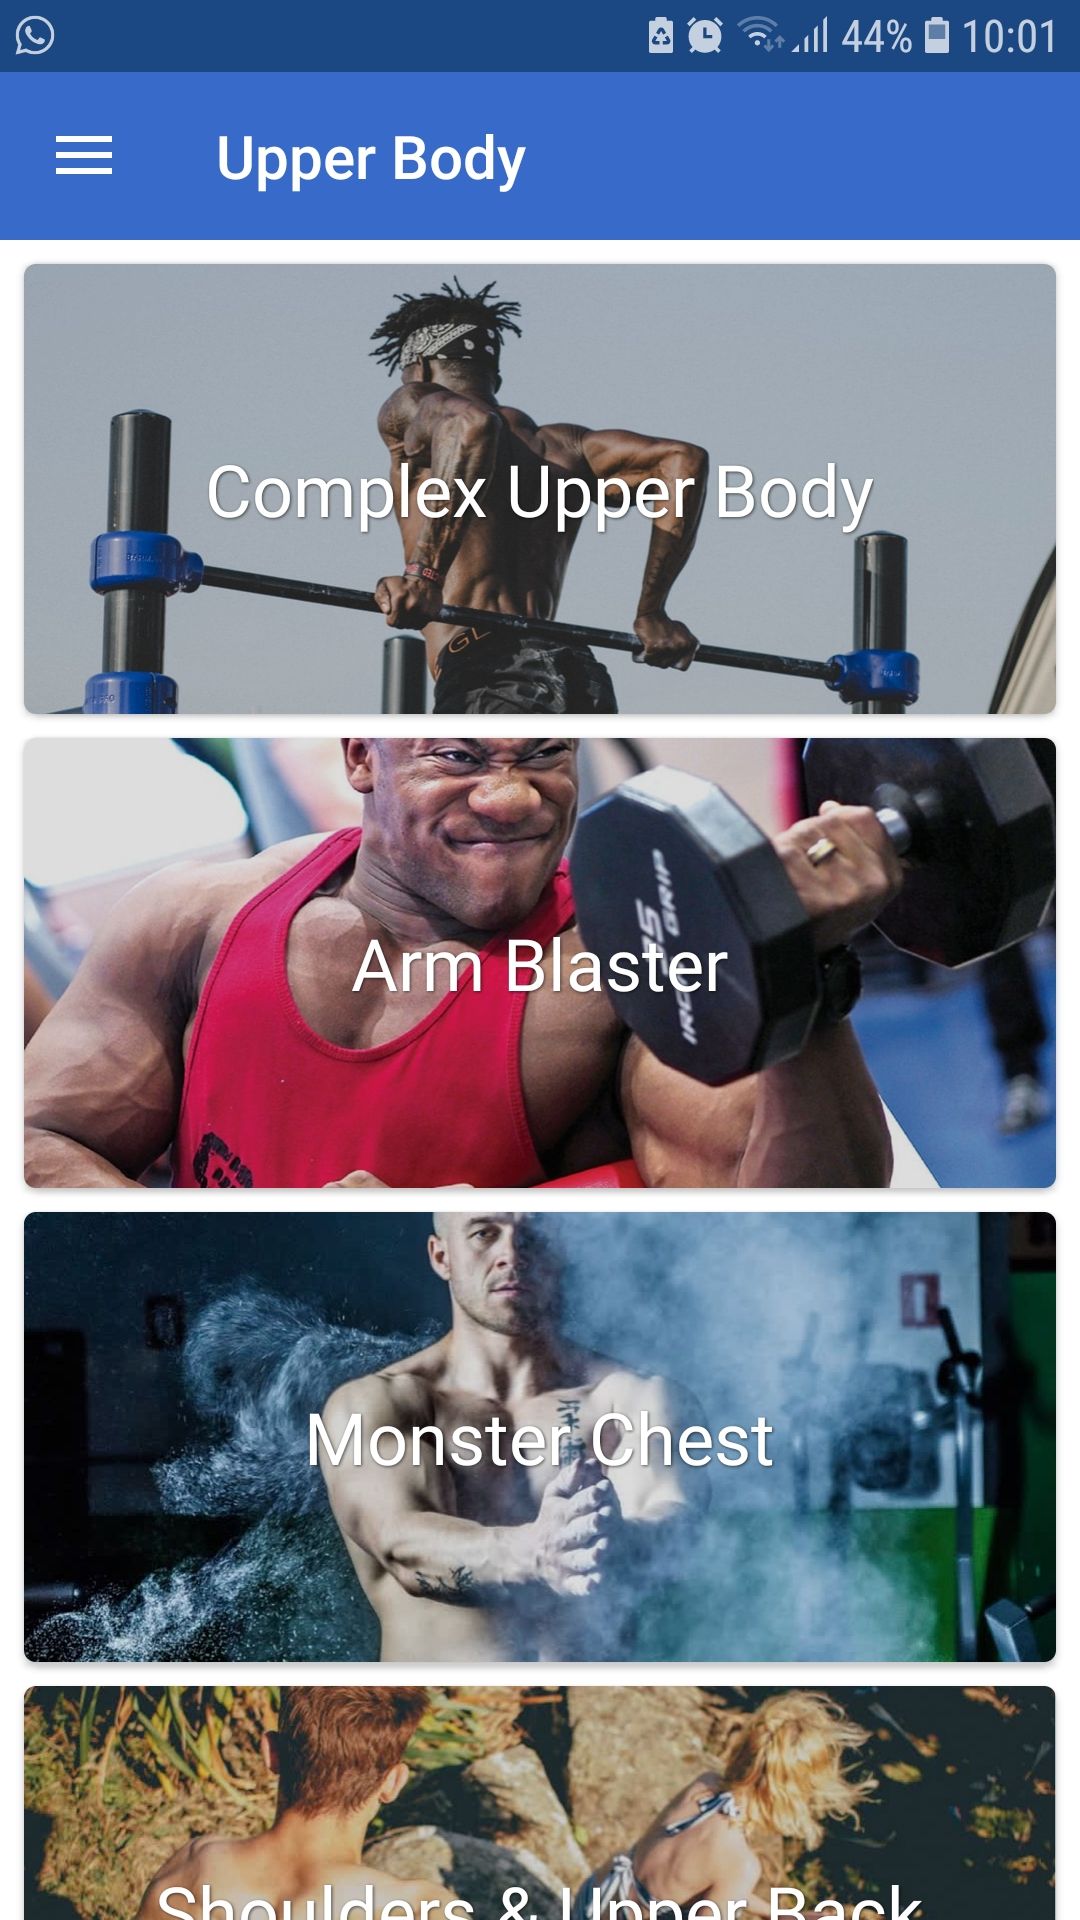 Upper Body Training mobile workout app